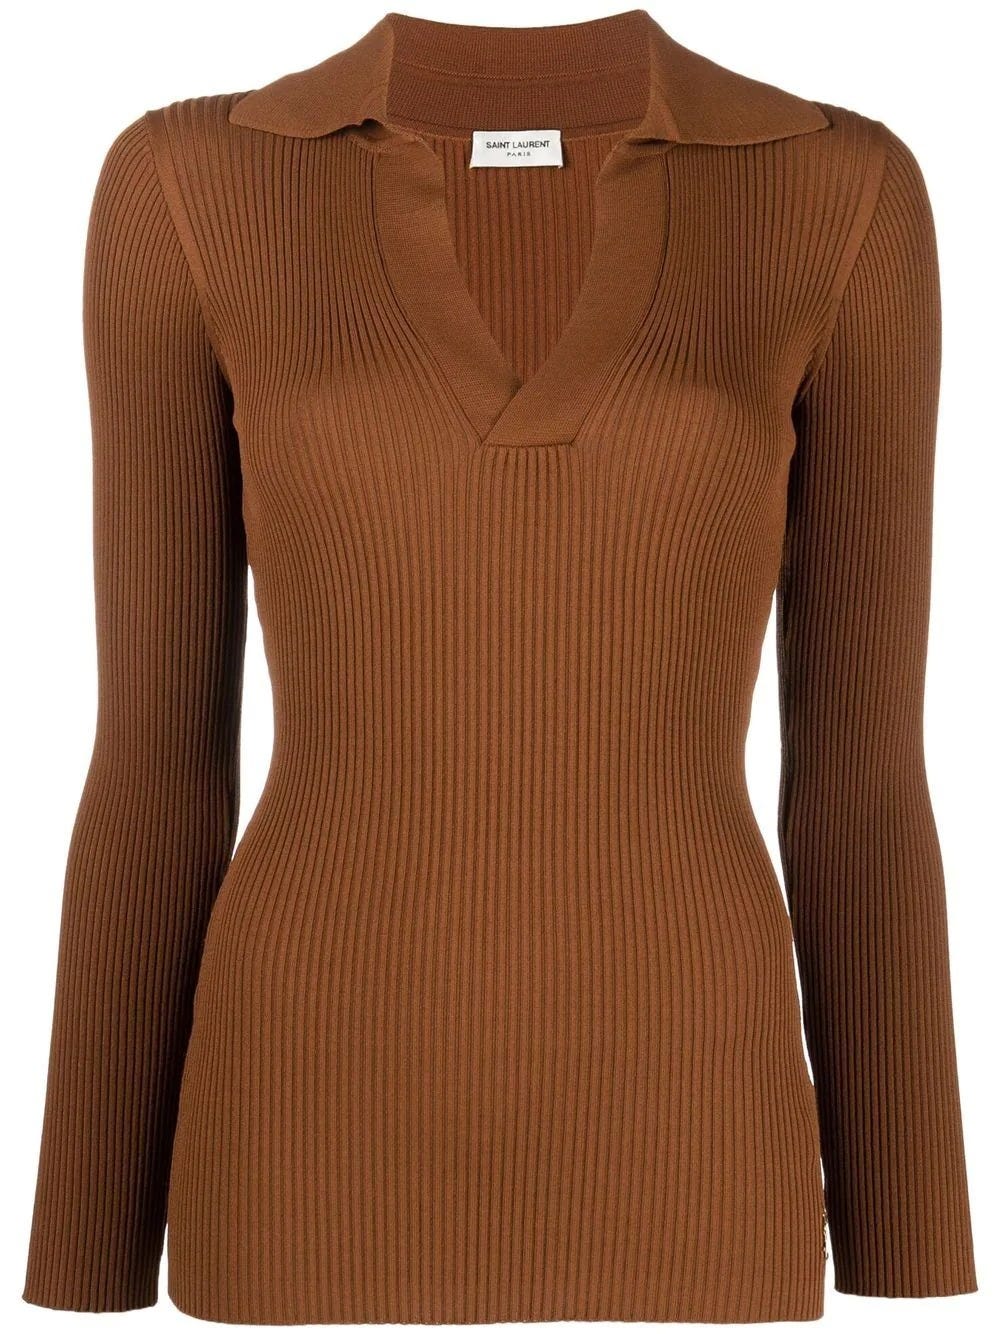 SAINT LAURENT BROWN SWEATER WITH V-NECK AND COLLAR